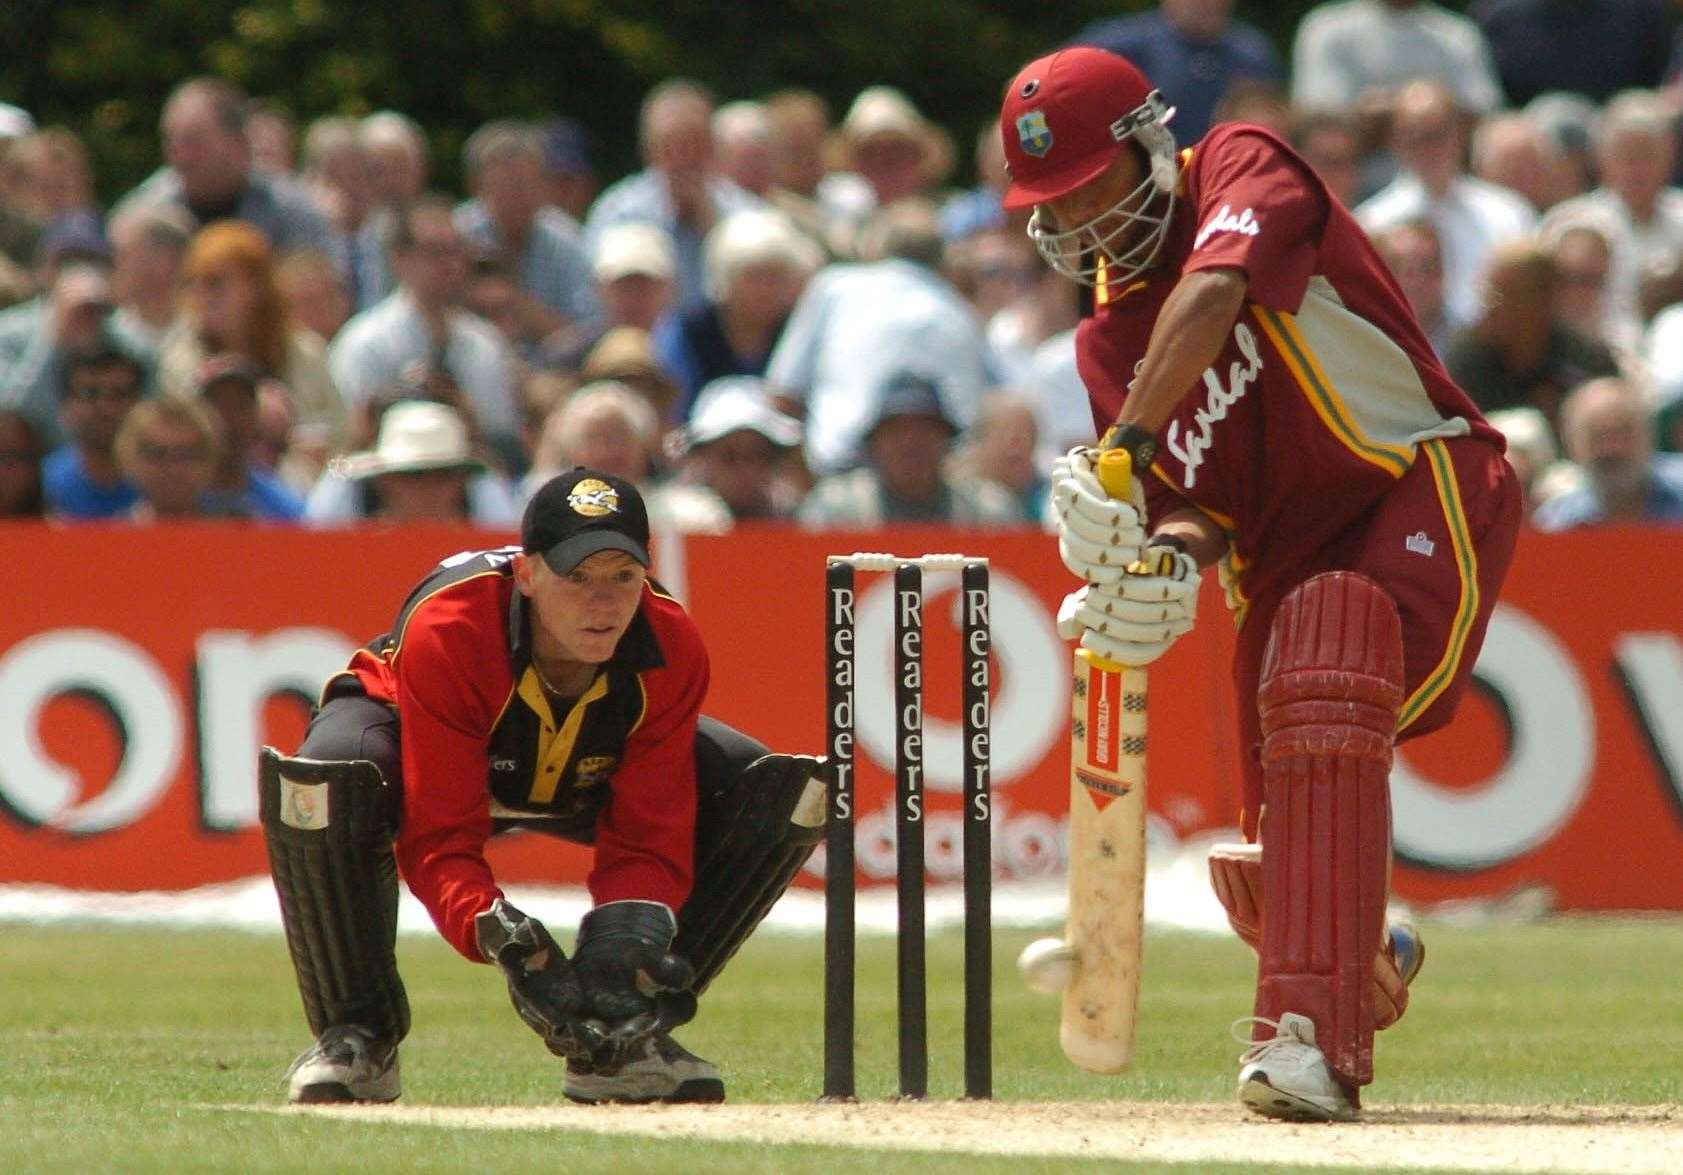 Kent wicketkeeper Niall O’Brien watches on as Ramnaresh Sarwan bats for the West Indies at Beckenham in 2004. Picture: Ady Kerry